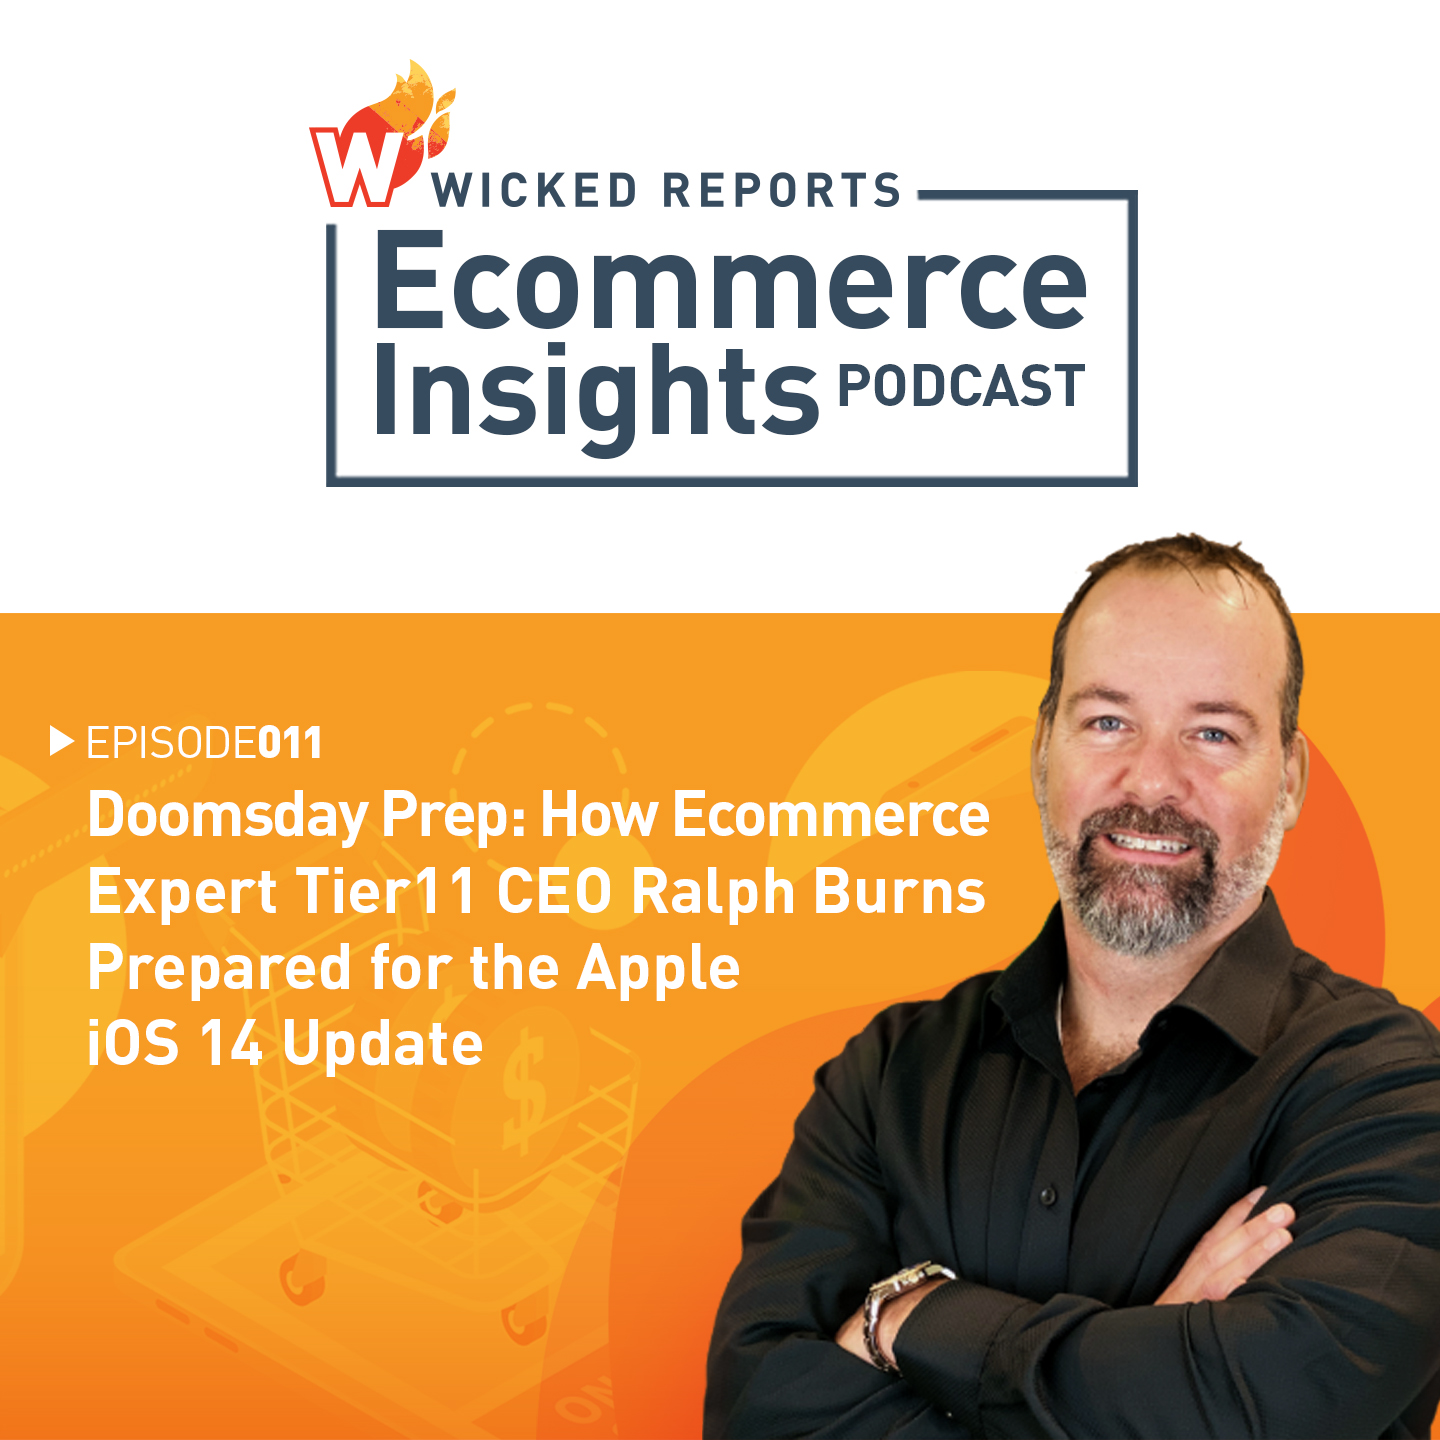 Doomsday Prep: How Ecommerce Expert Tier11 CEO Ralph Burns Prepared for the Apple iOS 14 Update